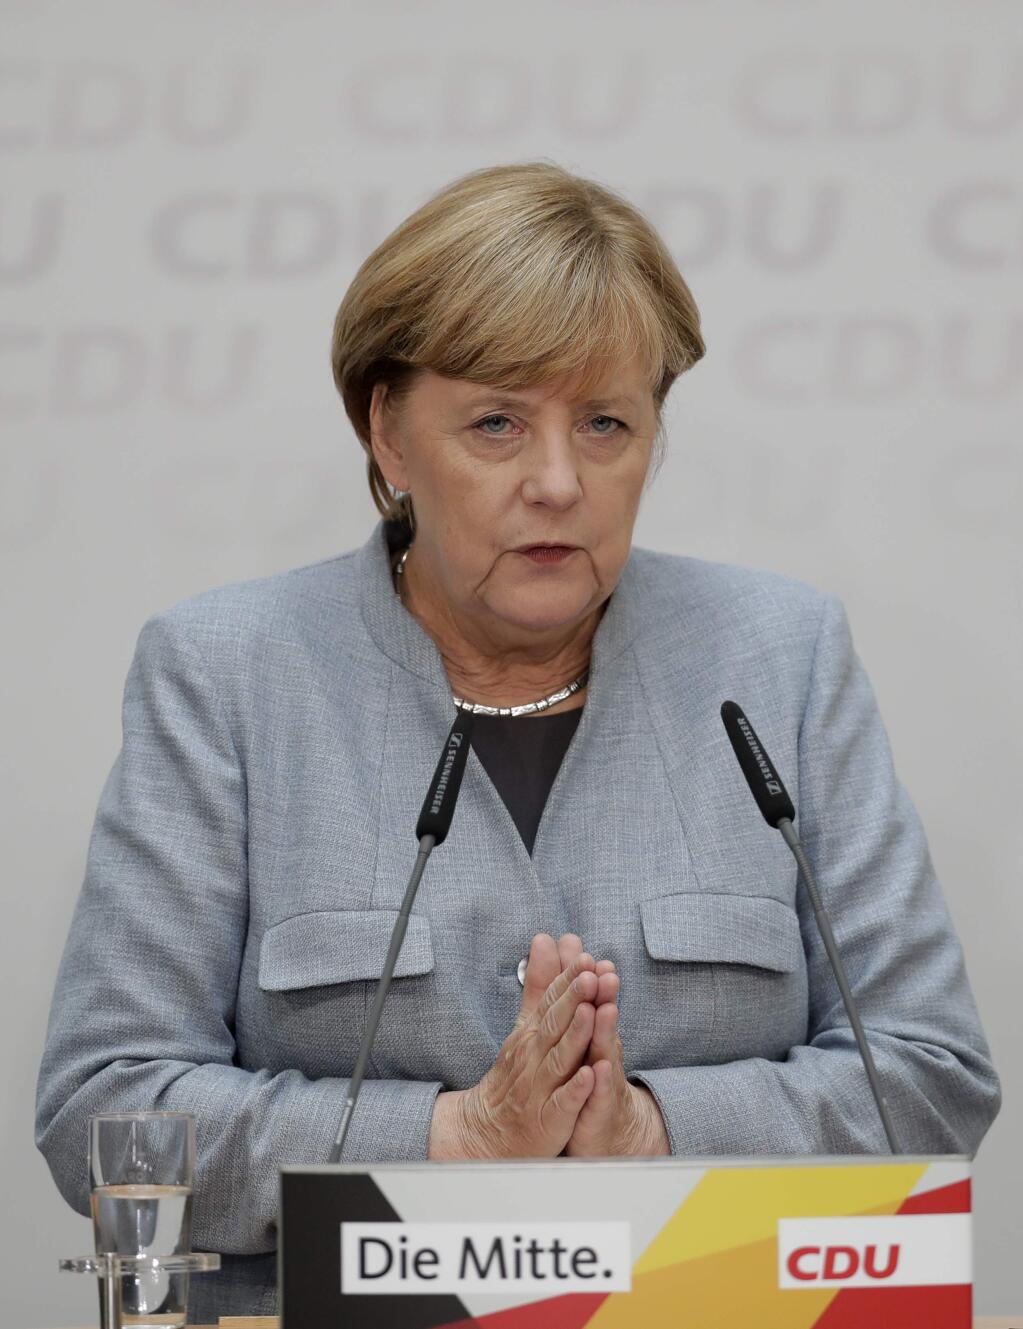 German Chancellor Angela Merkel speaks during a press conference after a board meeting of the Christian Democratic Union CDU in Berlin, Germany, Monday, Sept. 25, 2017, the day after the German parliament election. (AP Photo/Michael Sohn)